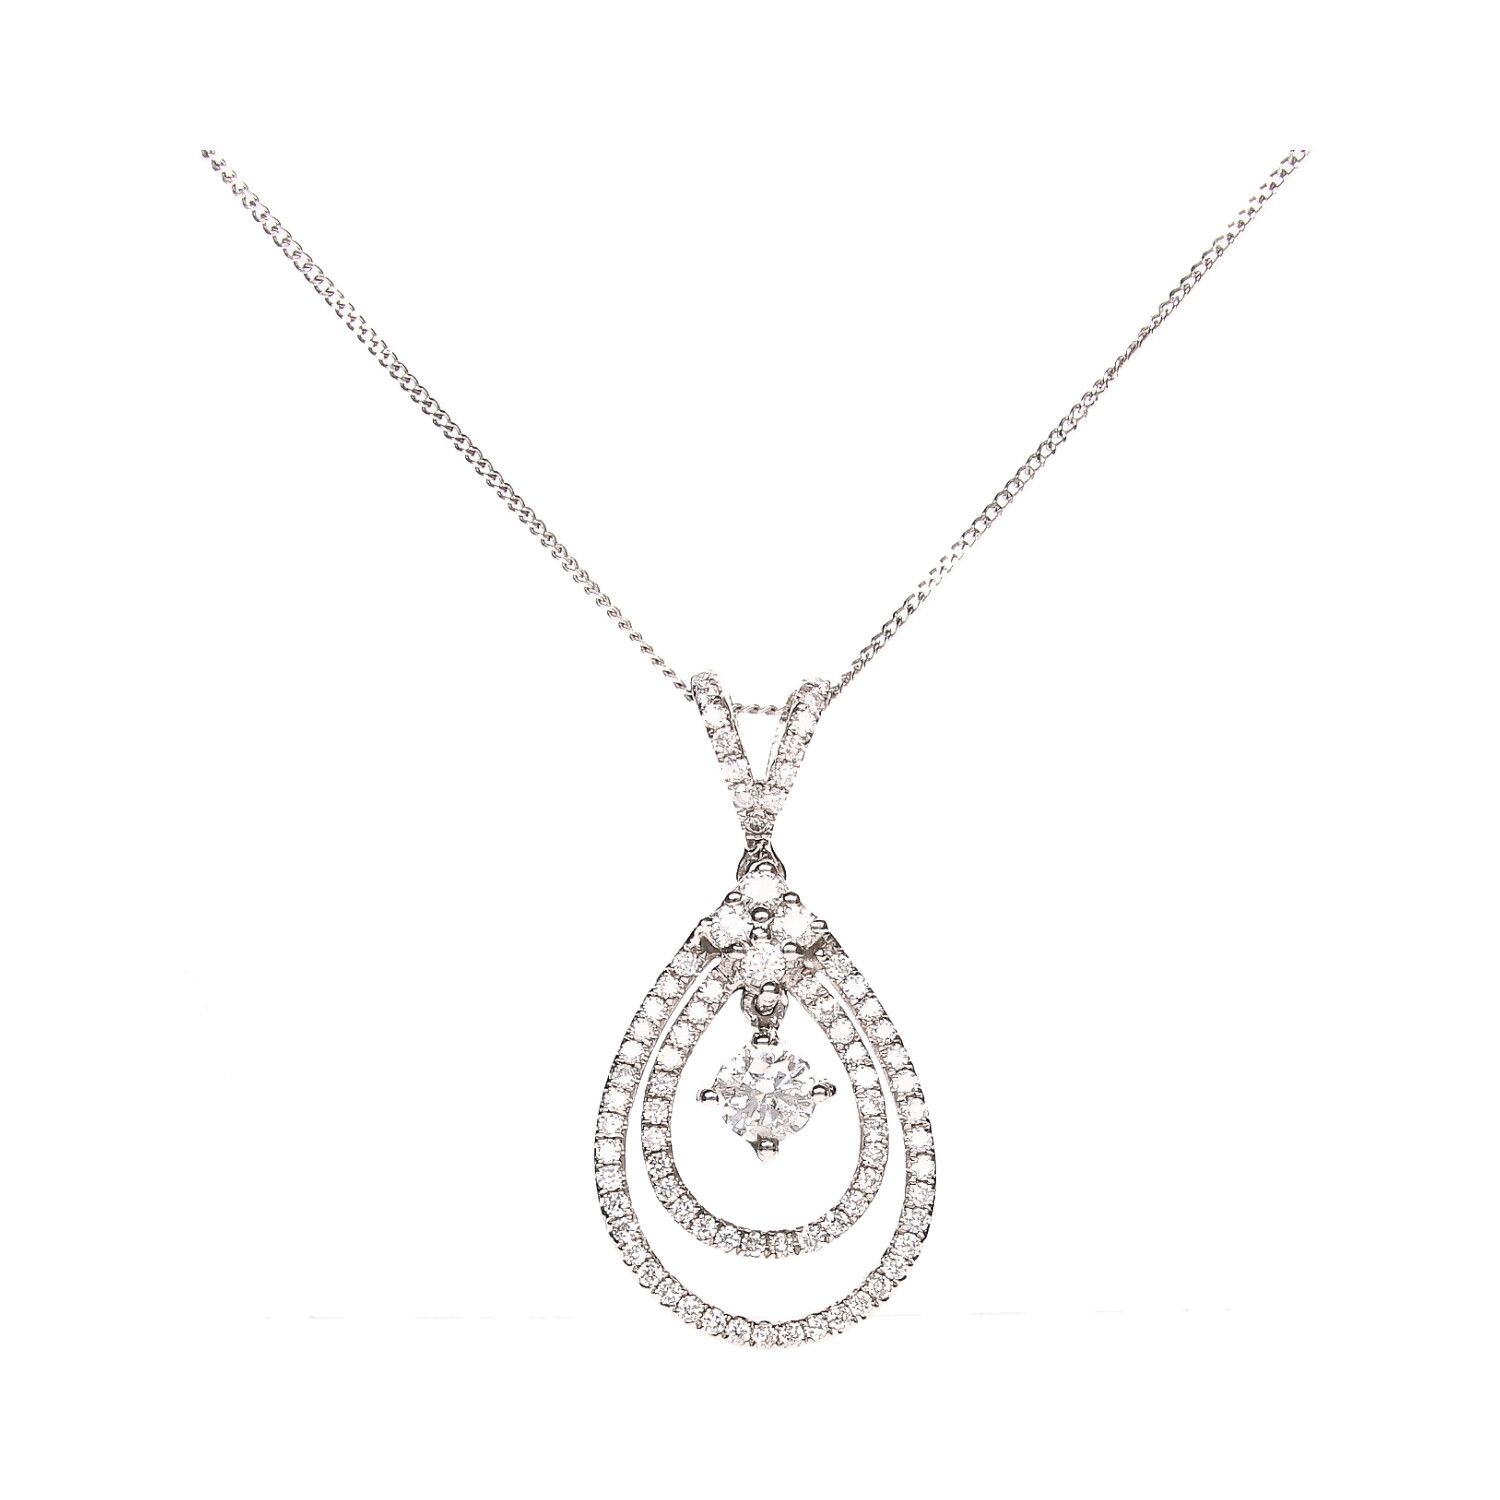 18ct White Gold Brilliant Cut Diamond Necklace From Berry's Jewellers